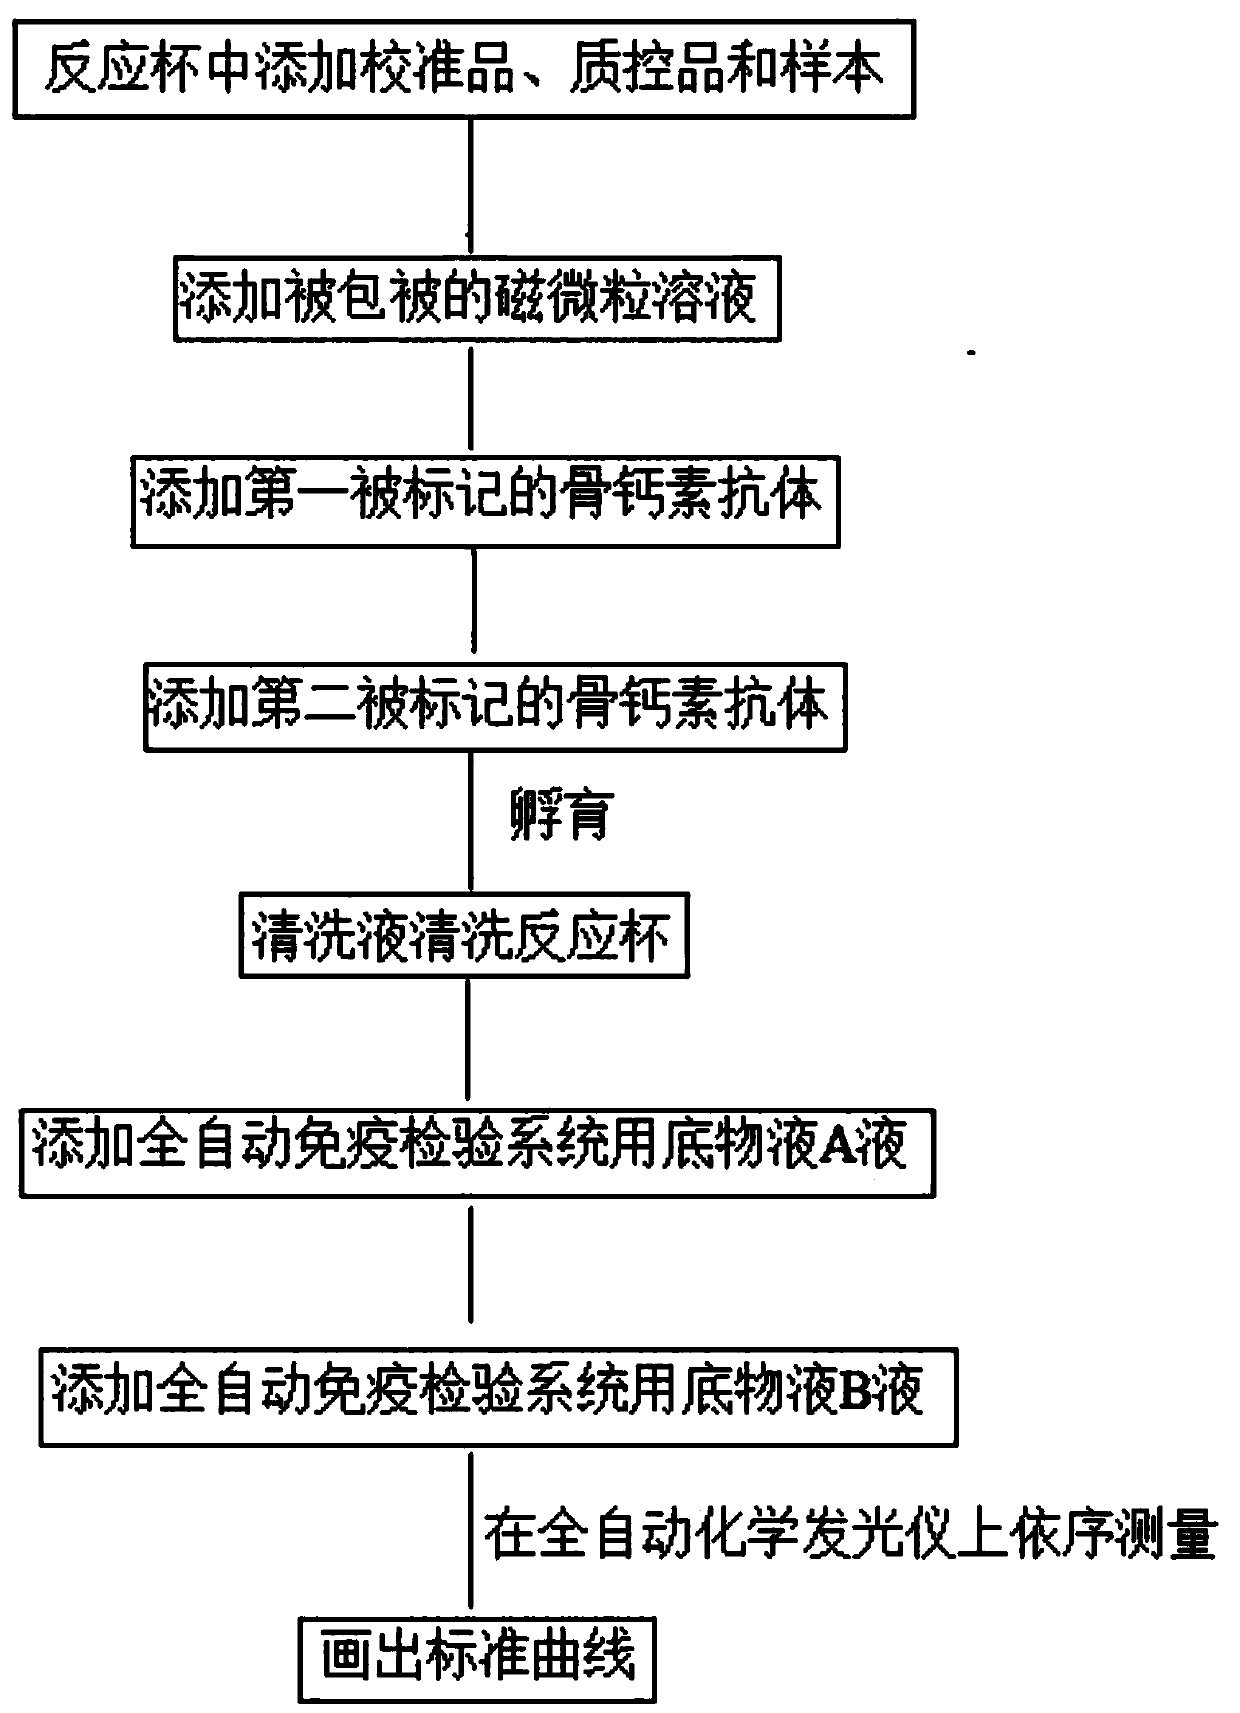 Osteocalcin-N terminal peptide detecting reagent, detection method and application thereof